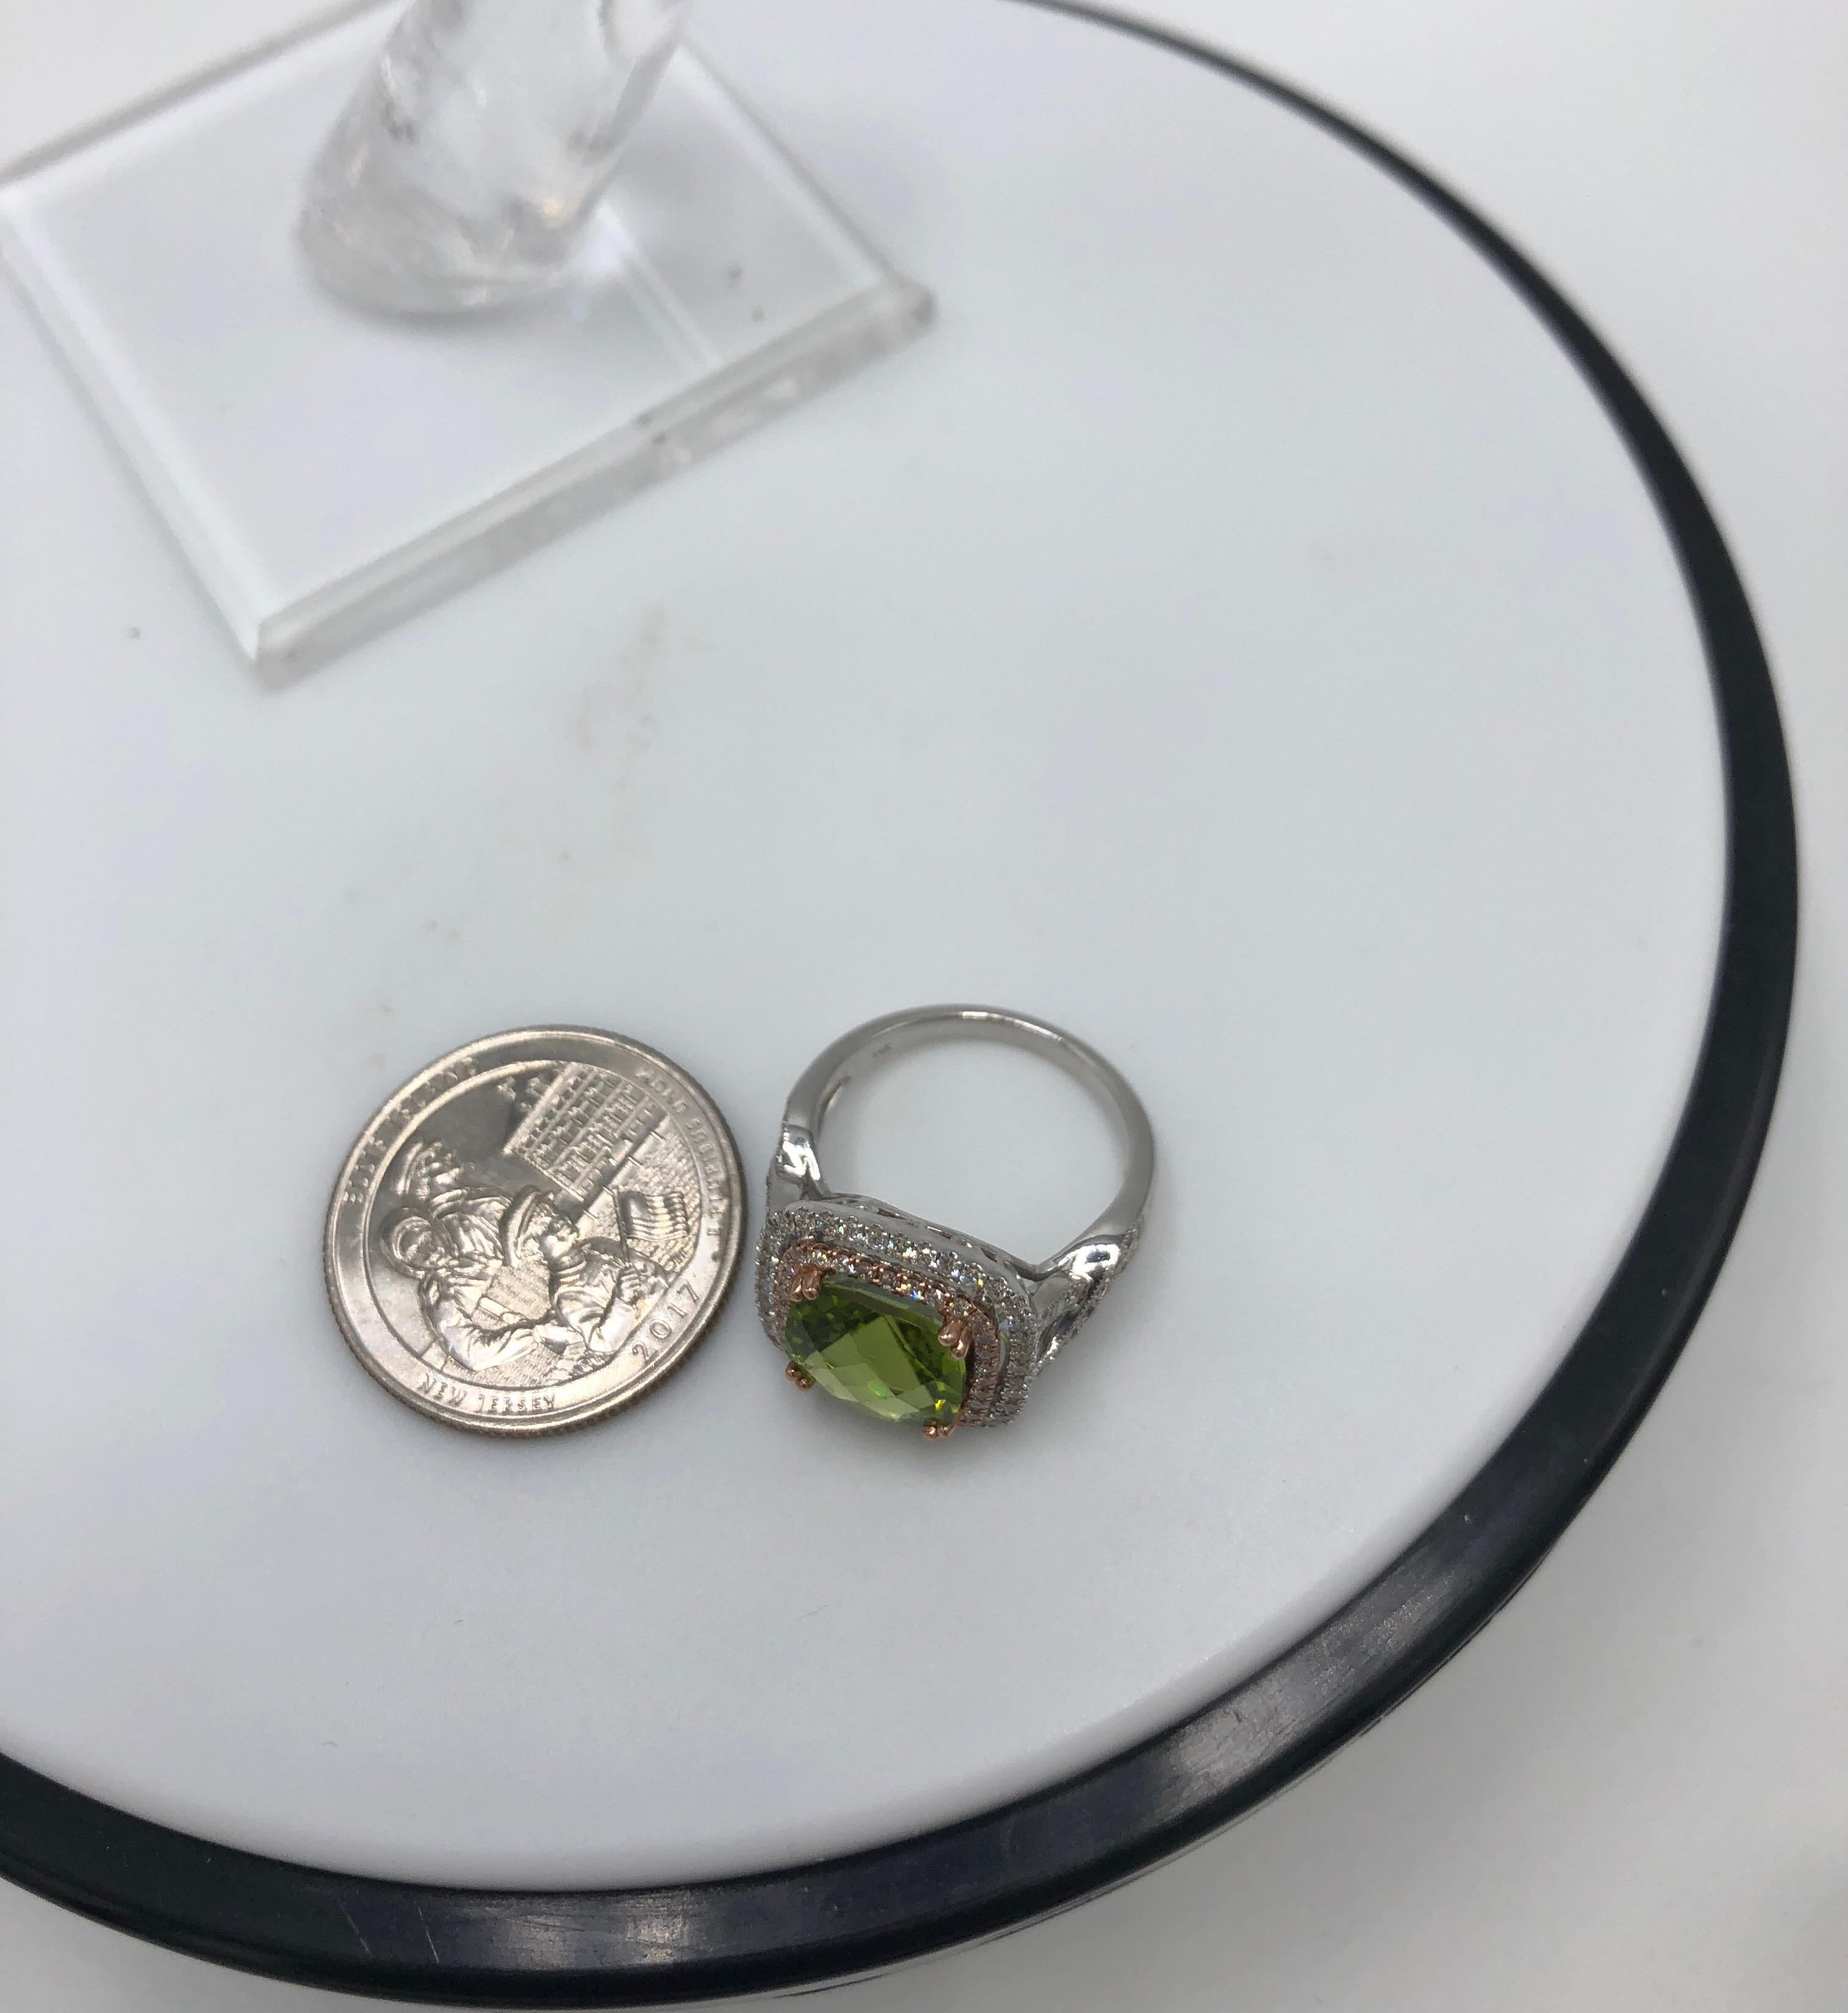 Stunning Jewels by Jacob White Gold and Rose Gold Ring with Filagree.  Faceted peridot.  14K White Gold and Rose Gold with 4.31 CT Peridot.  Cushion Cut.  .67CT Weight of Diamonds with 94 diamonds.  